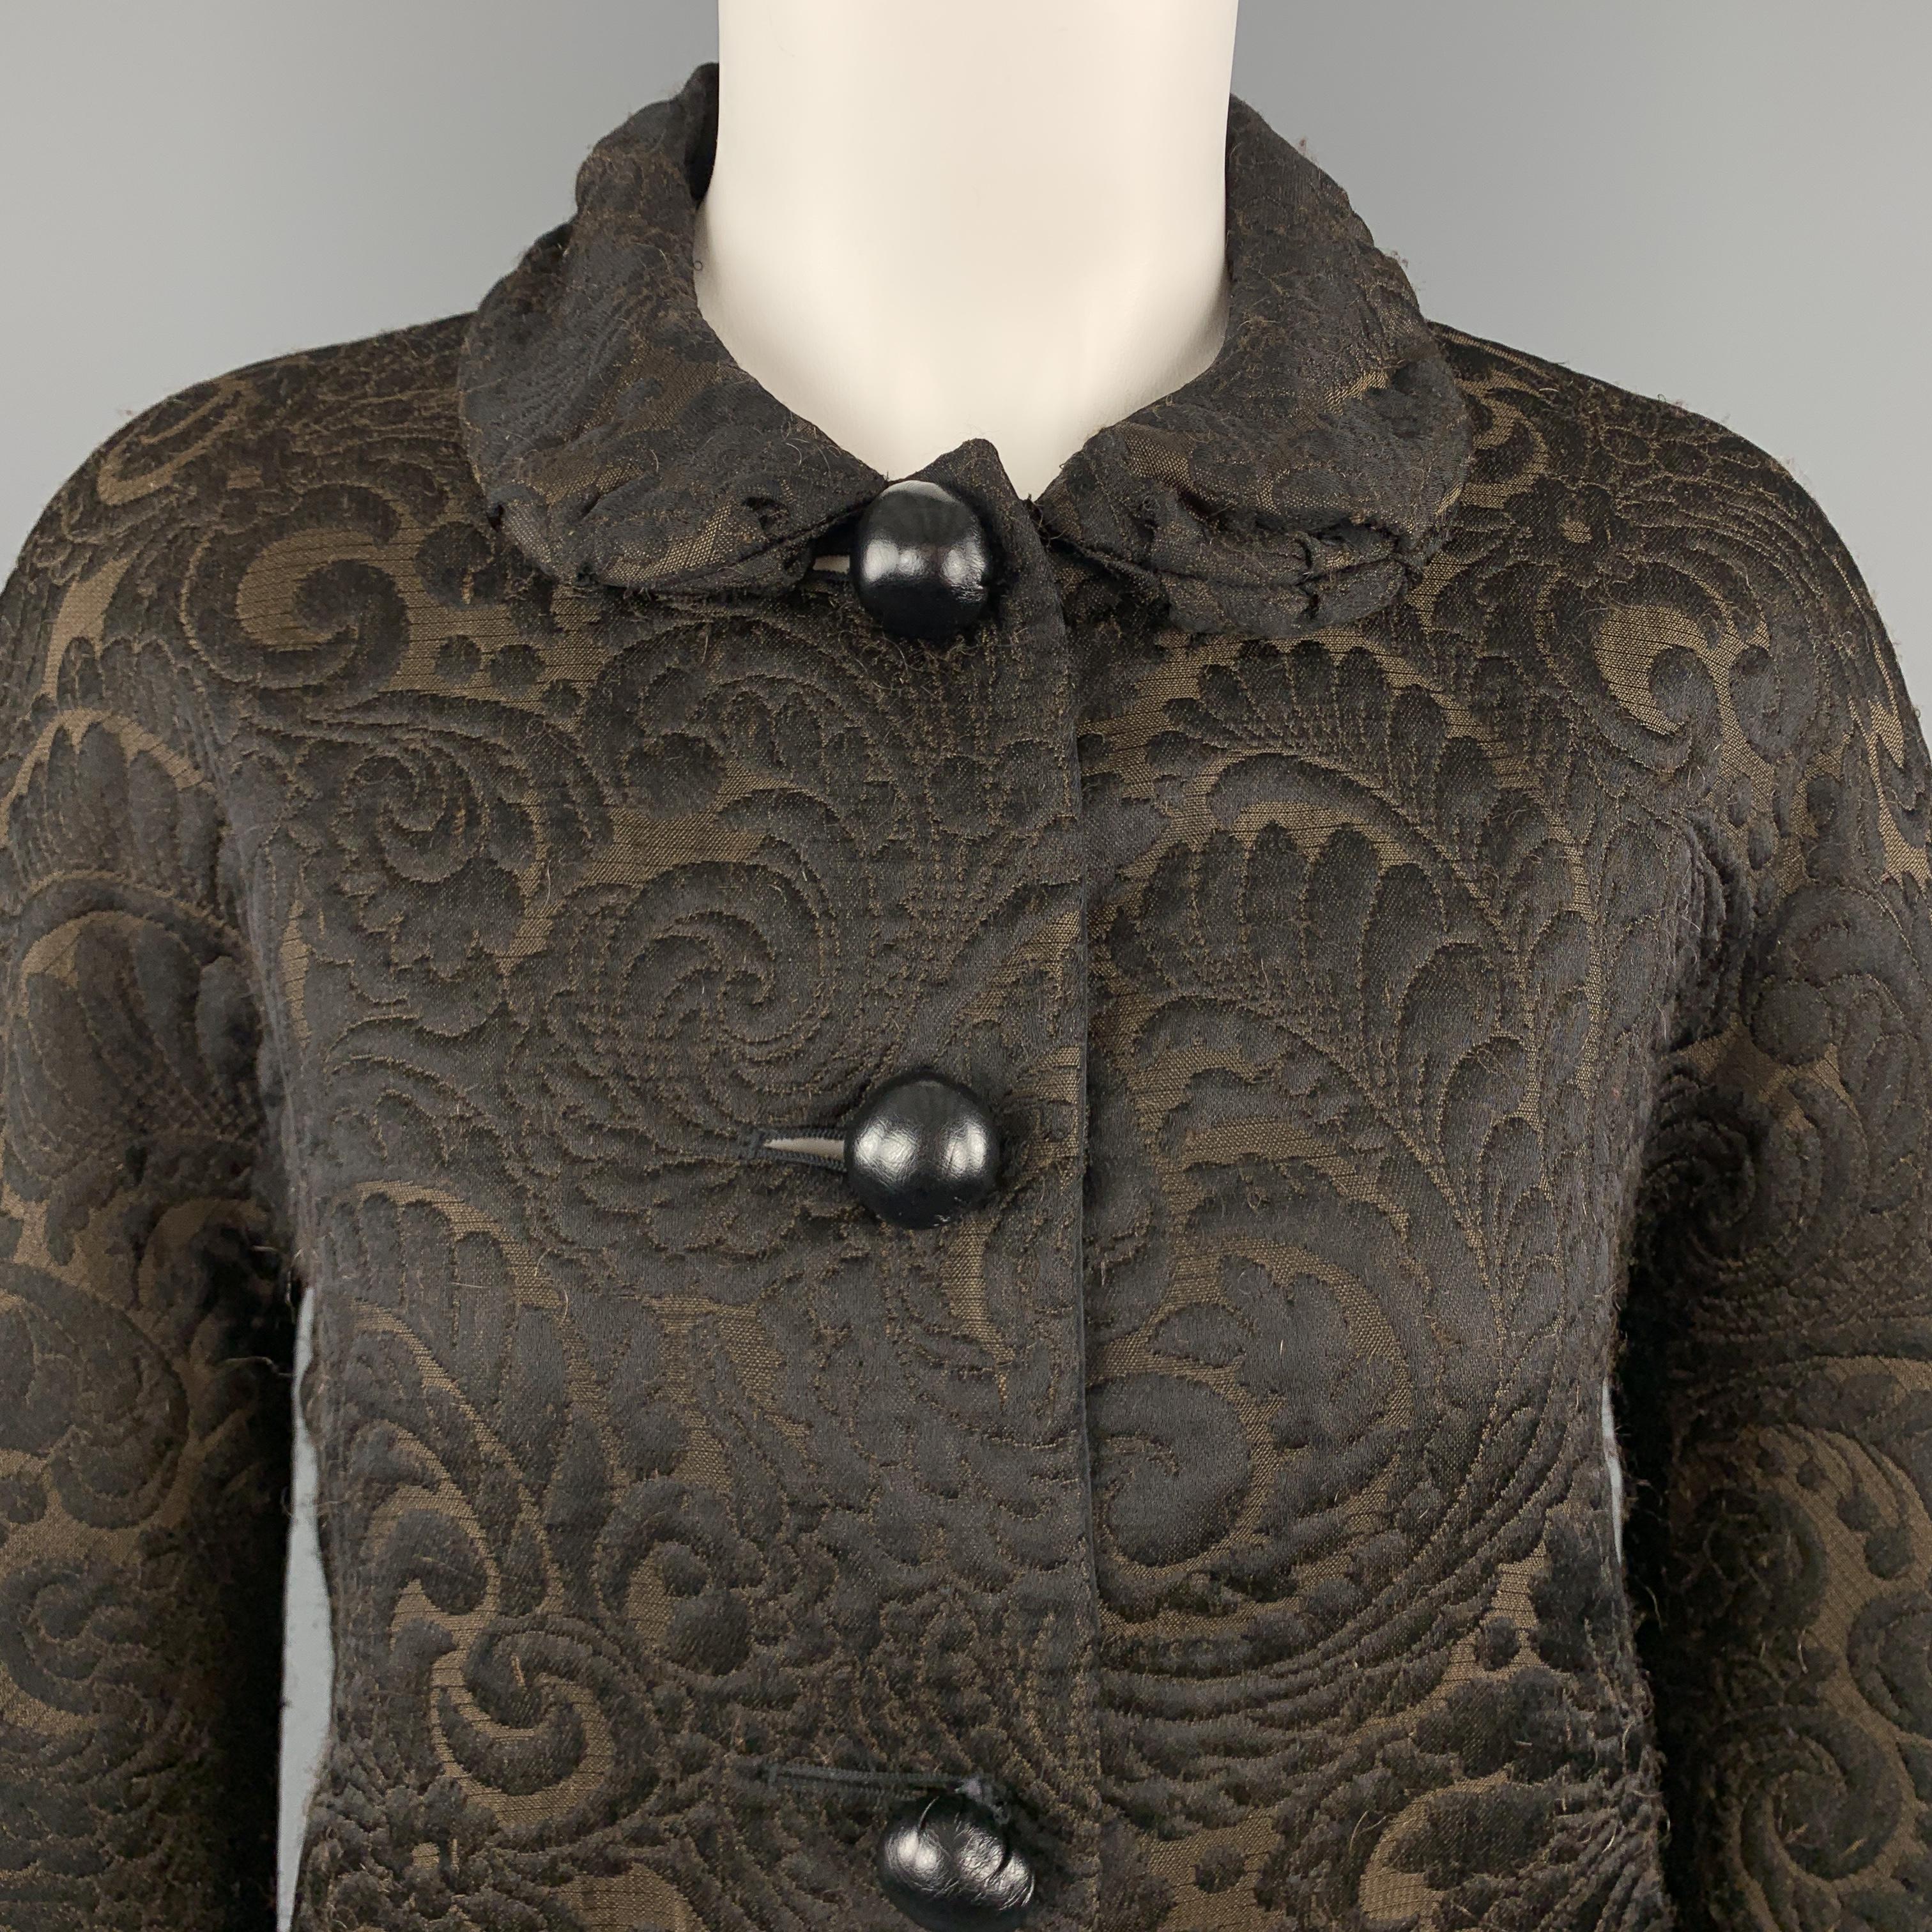 LANVIN Fall 2006 cropped jacket comes in brown and black textured brocade fabric with a Peter Pan collar and stuffed black leather buttons. Wear throughout fabric. Made in France.

Good Pre-Owned Condition.
Marked: FR 36

Measurements:

Shoulder: 16